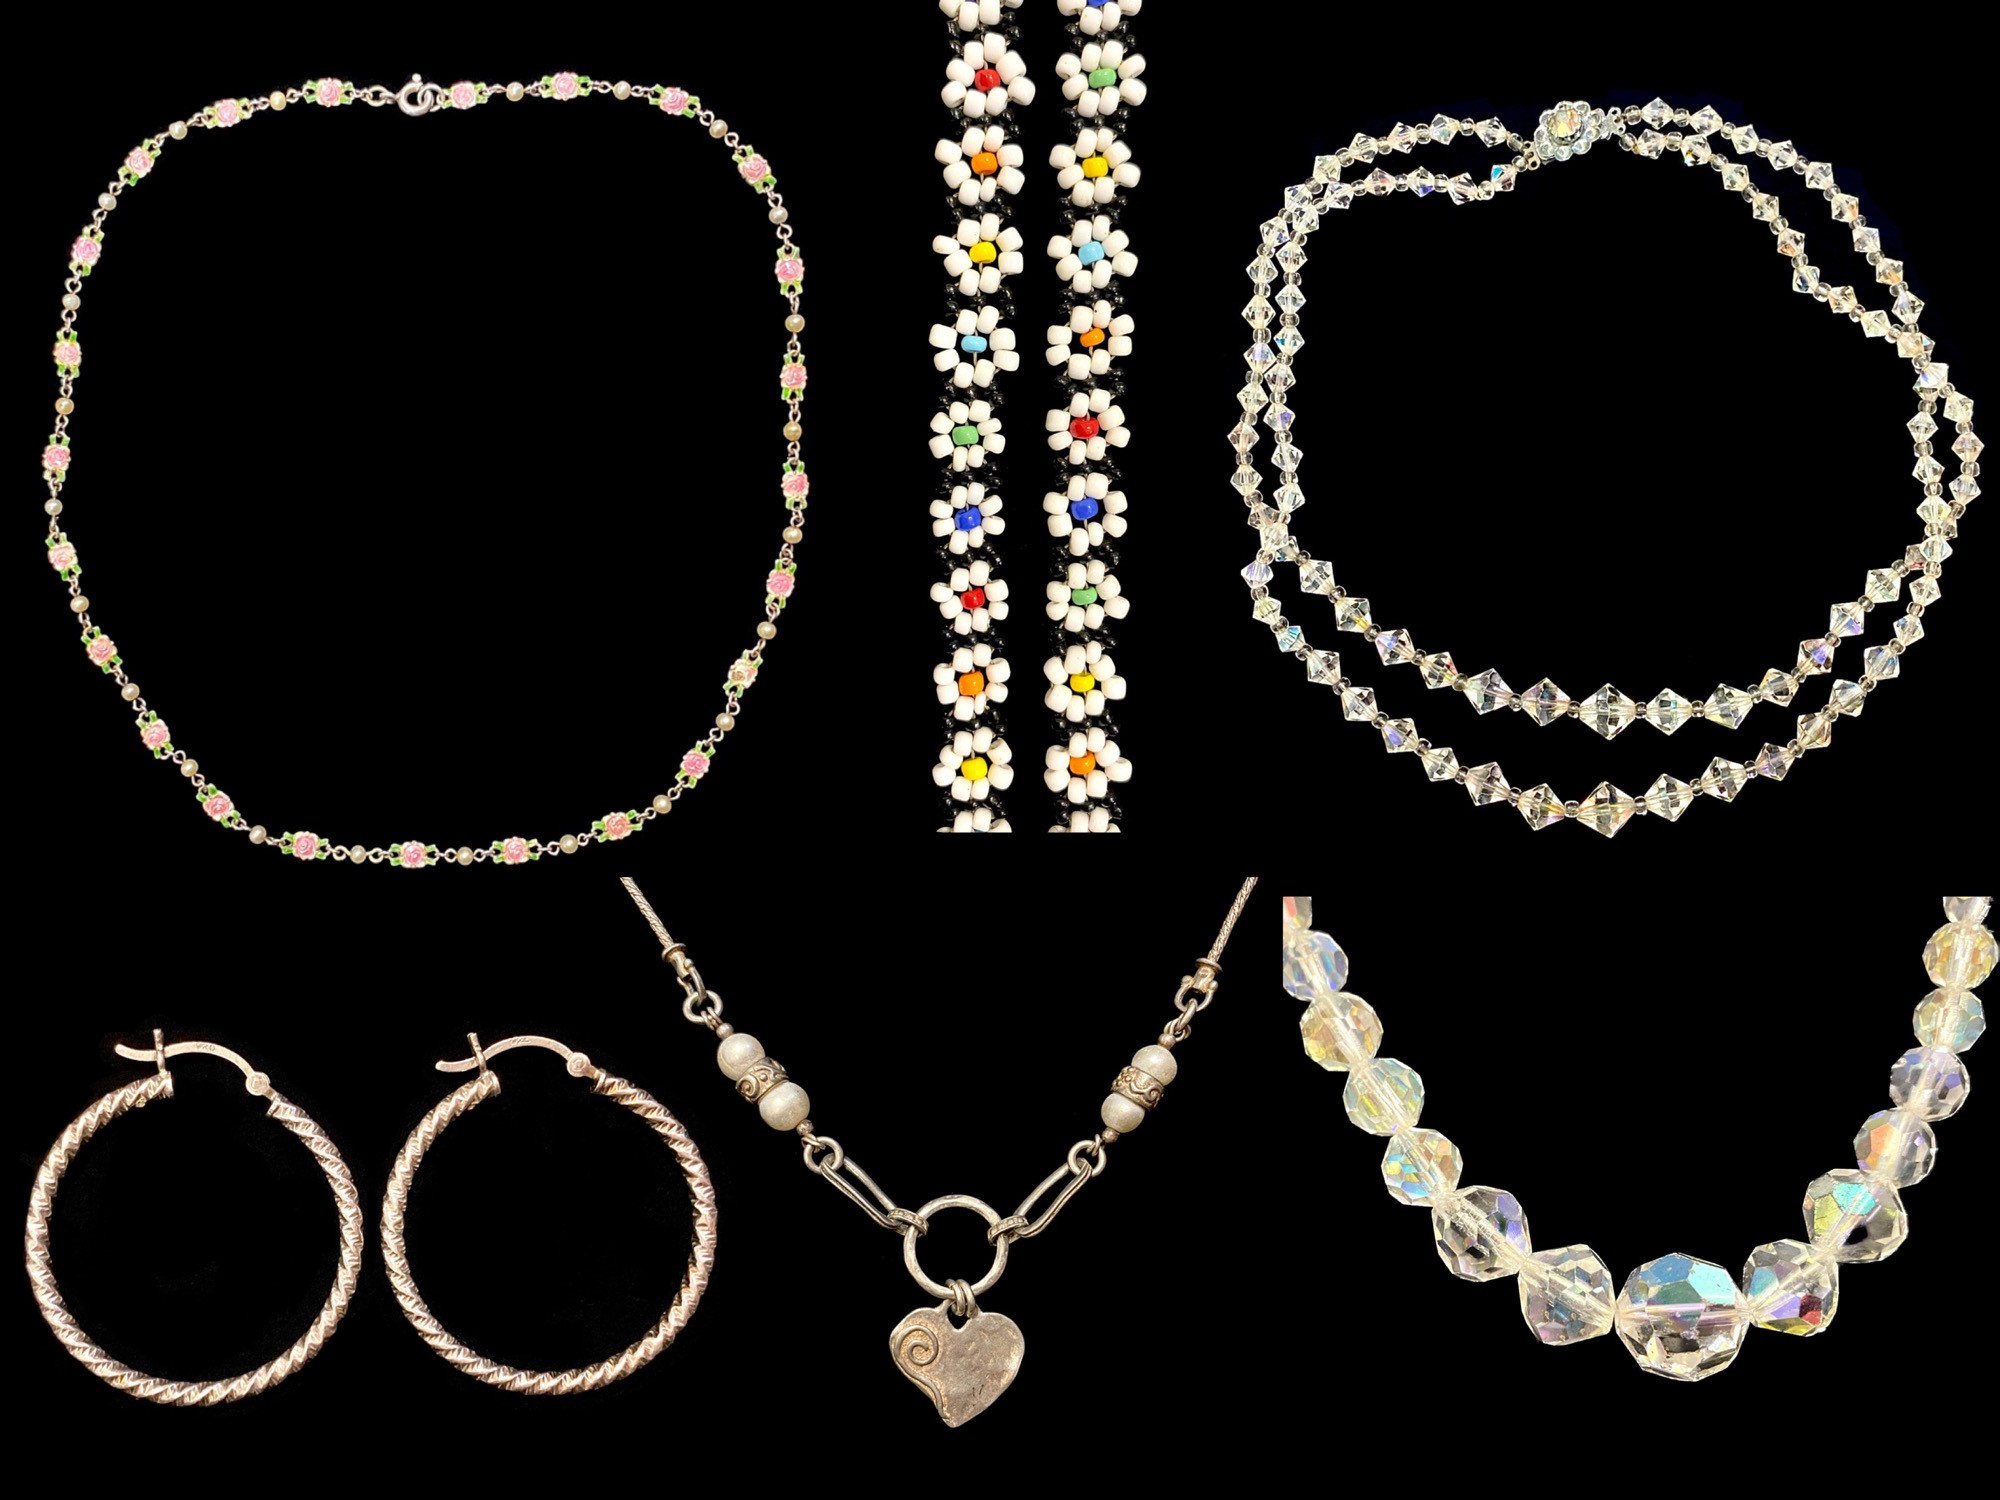 Collection of ( 5 ) Beaded Necklaces, 1 Silver Based, + 1 Pair of Silver Hooping Earrings. An